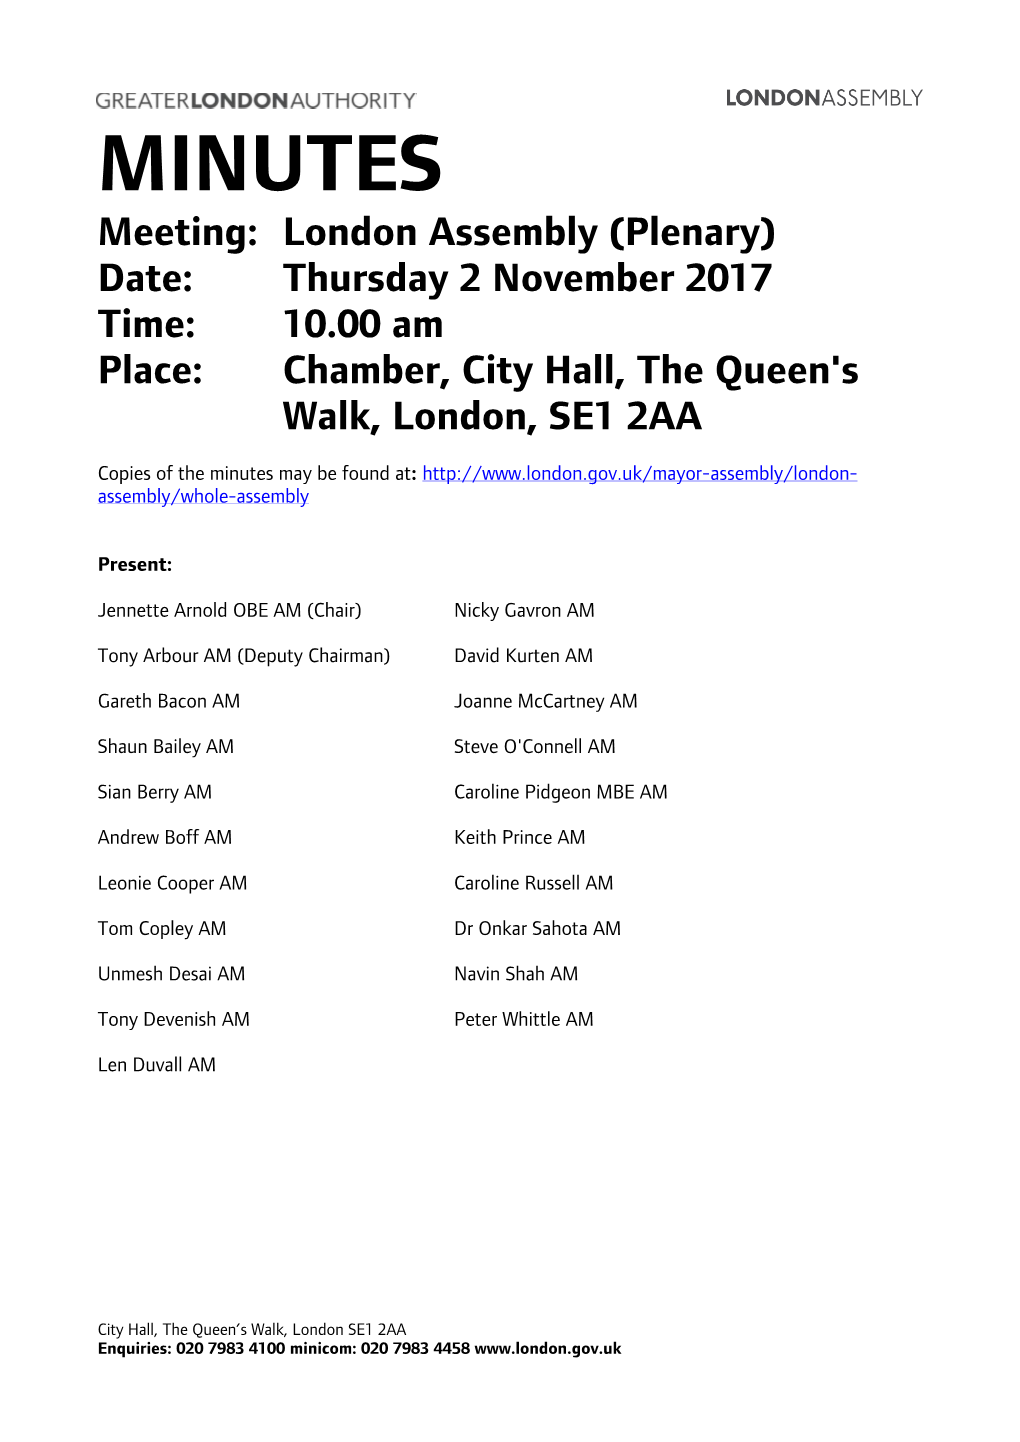 MINUTES Meeting: London Assembly (Plenary) Date: Thursday 2 November 2017 Time: 10.00 Am Place: Chamber, City Hall, the Queen's Walk, London, SE1 2AA